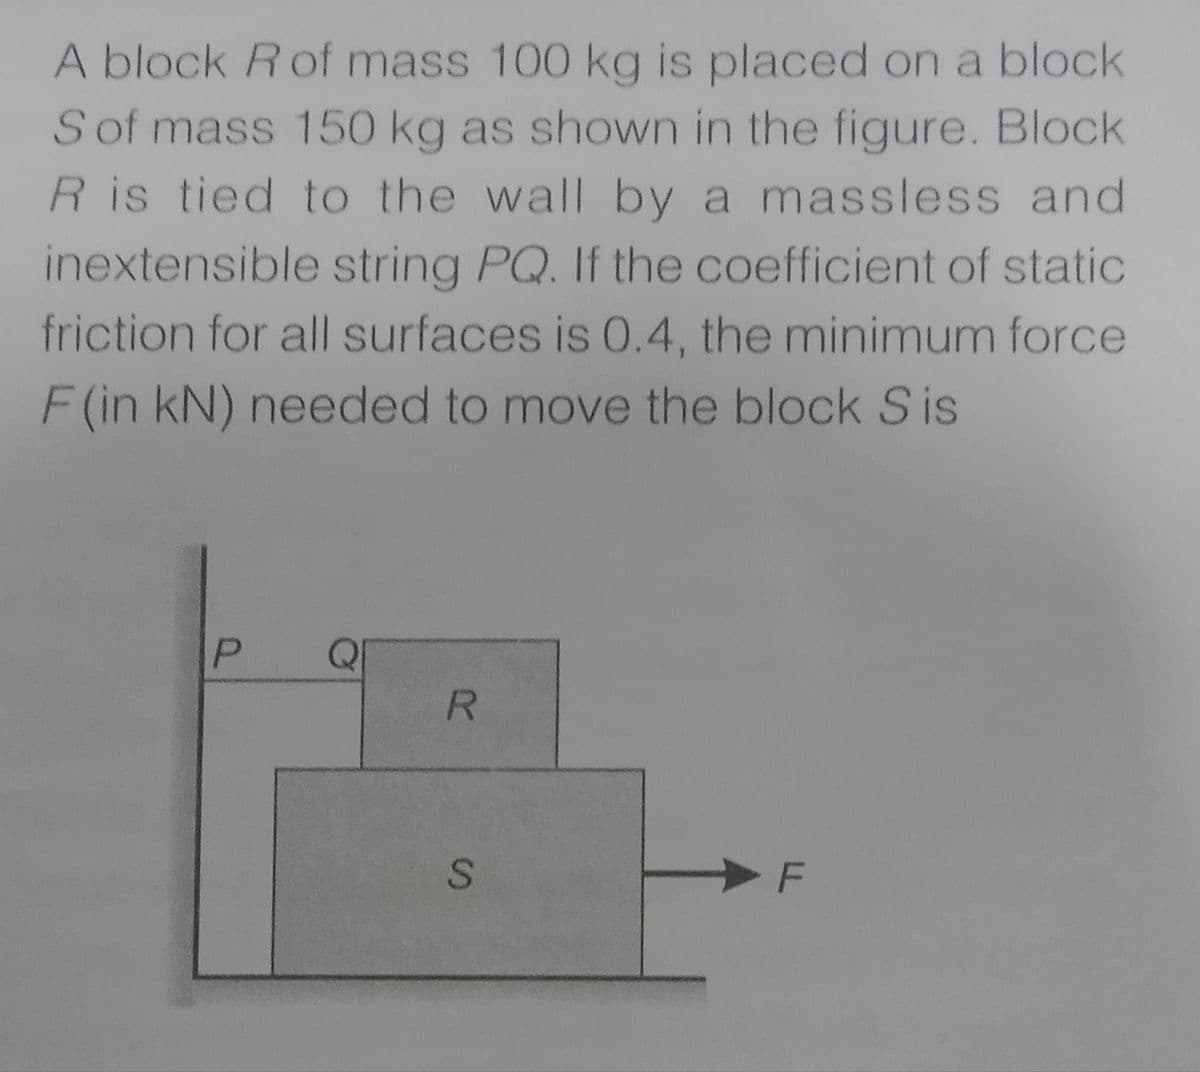 A block Rof mass 100 kg is placed on a block
Sof mass 150 kg as shown in the figure. Block
R is tied to the wall by a massless and
inextensible string PQ. If the coefficient of static
friction for all surfaces is 0.4, the minimum force
F (in kN) needed to move the block S is
P
QI
LL
